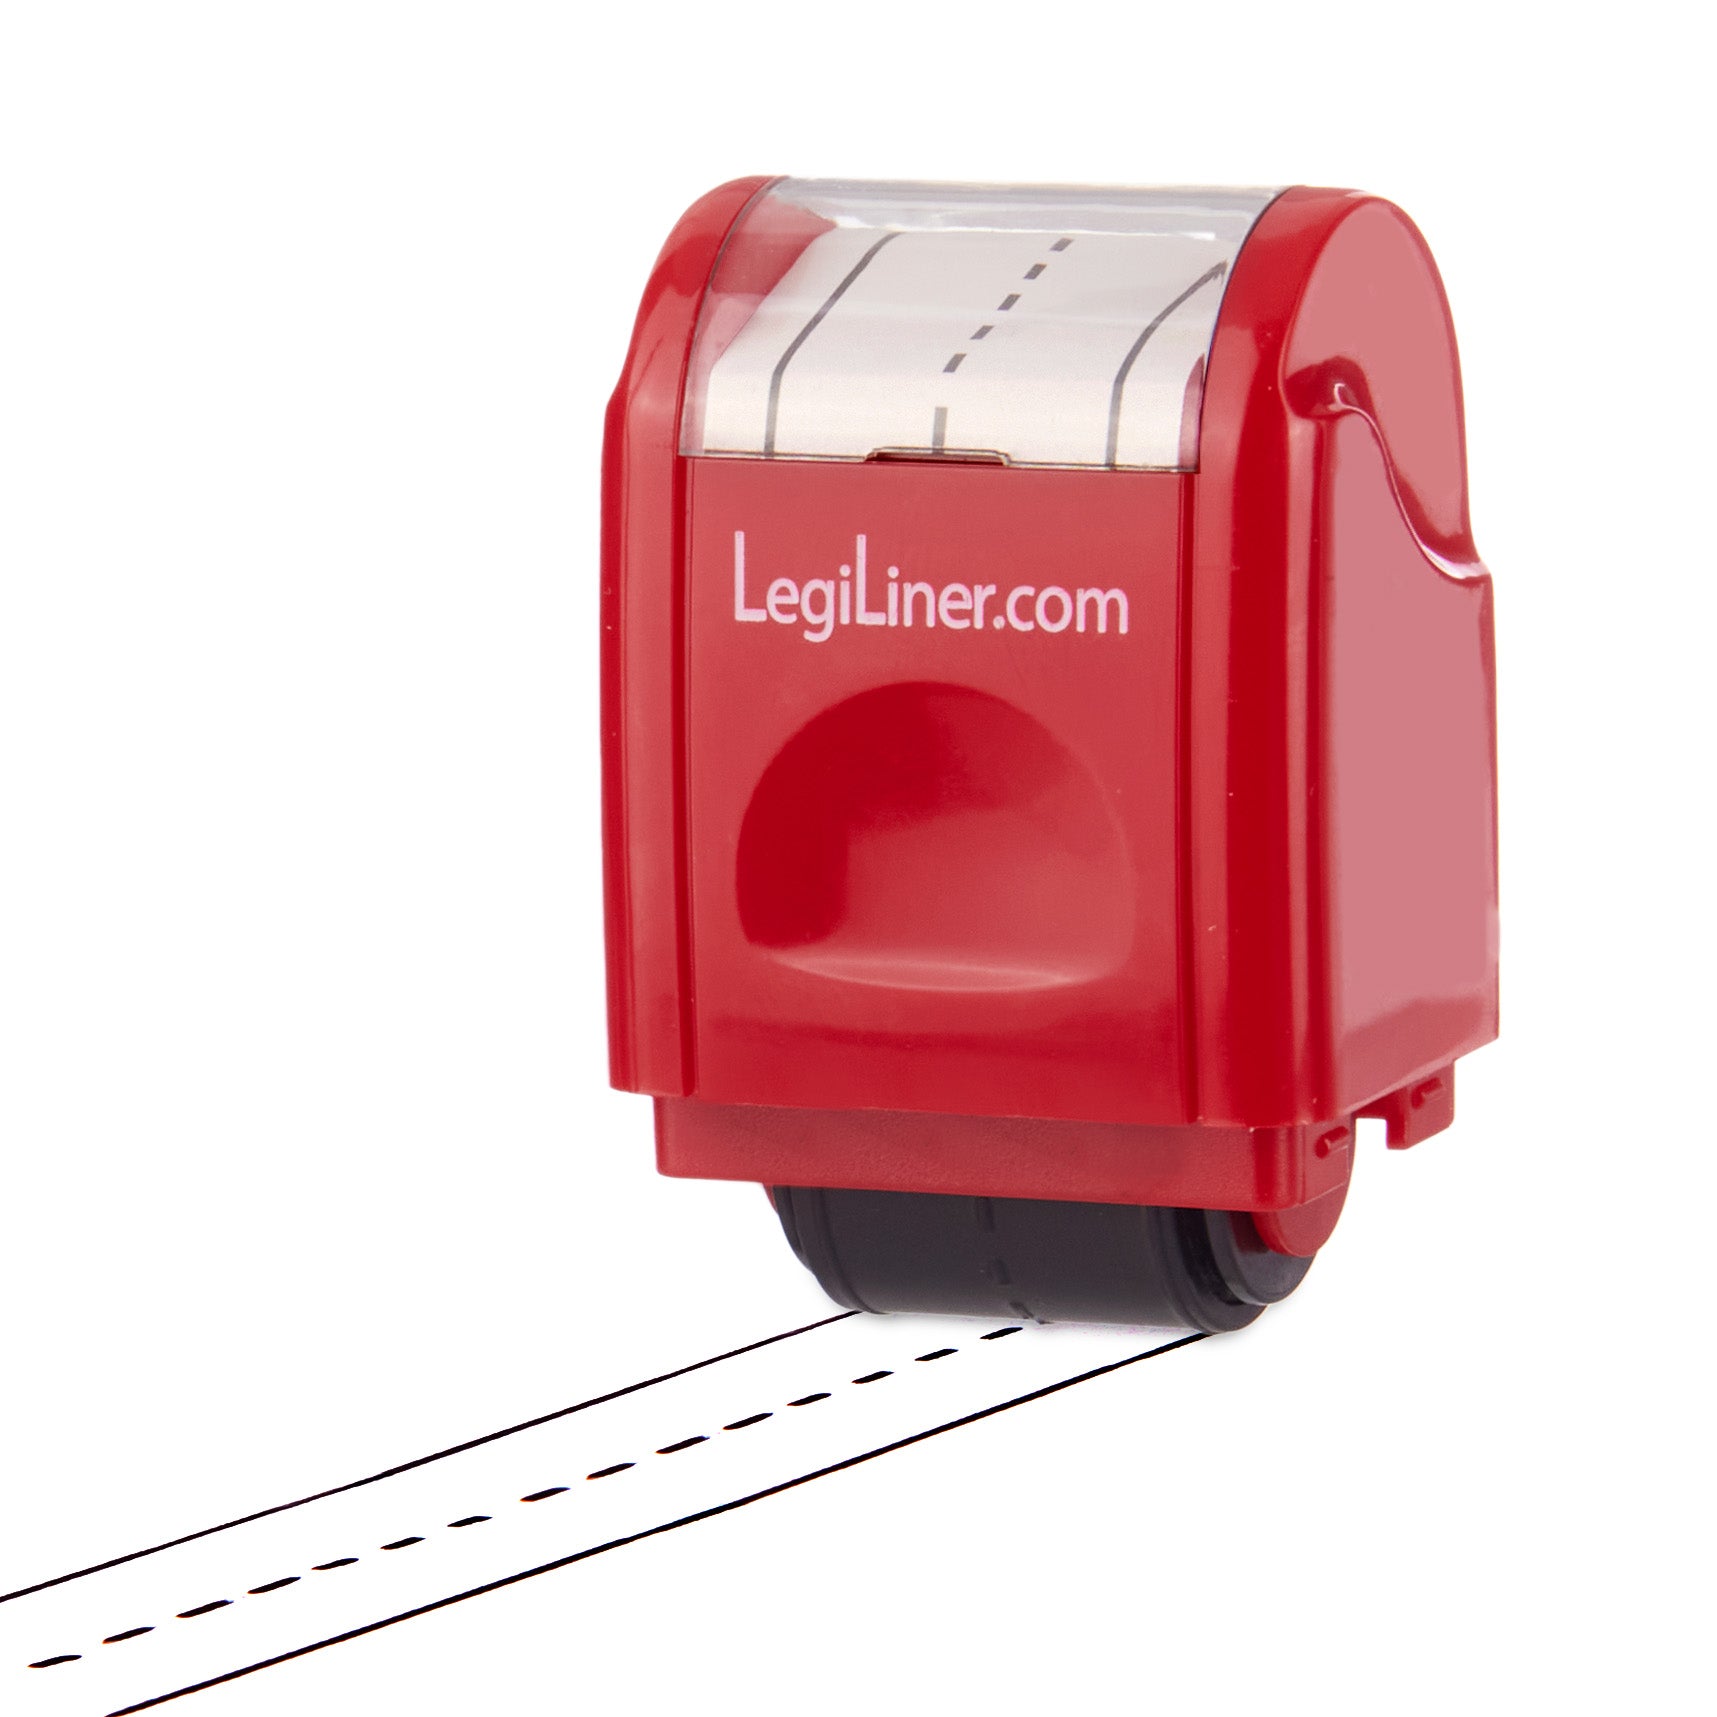 Promot Self Inking Personalized Stamp - Up to 5 Lines of